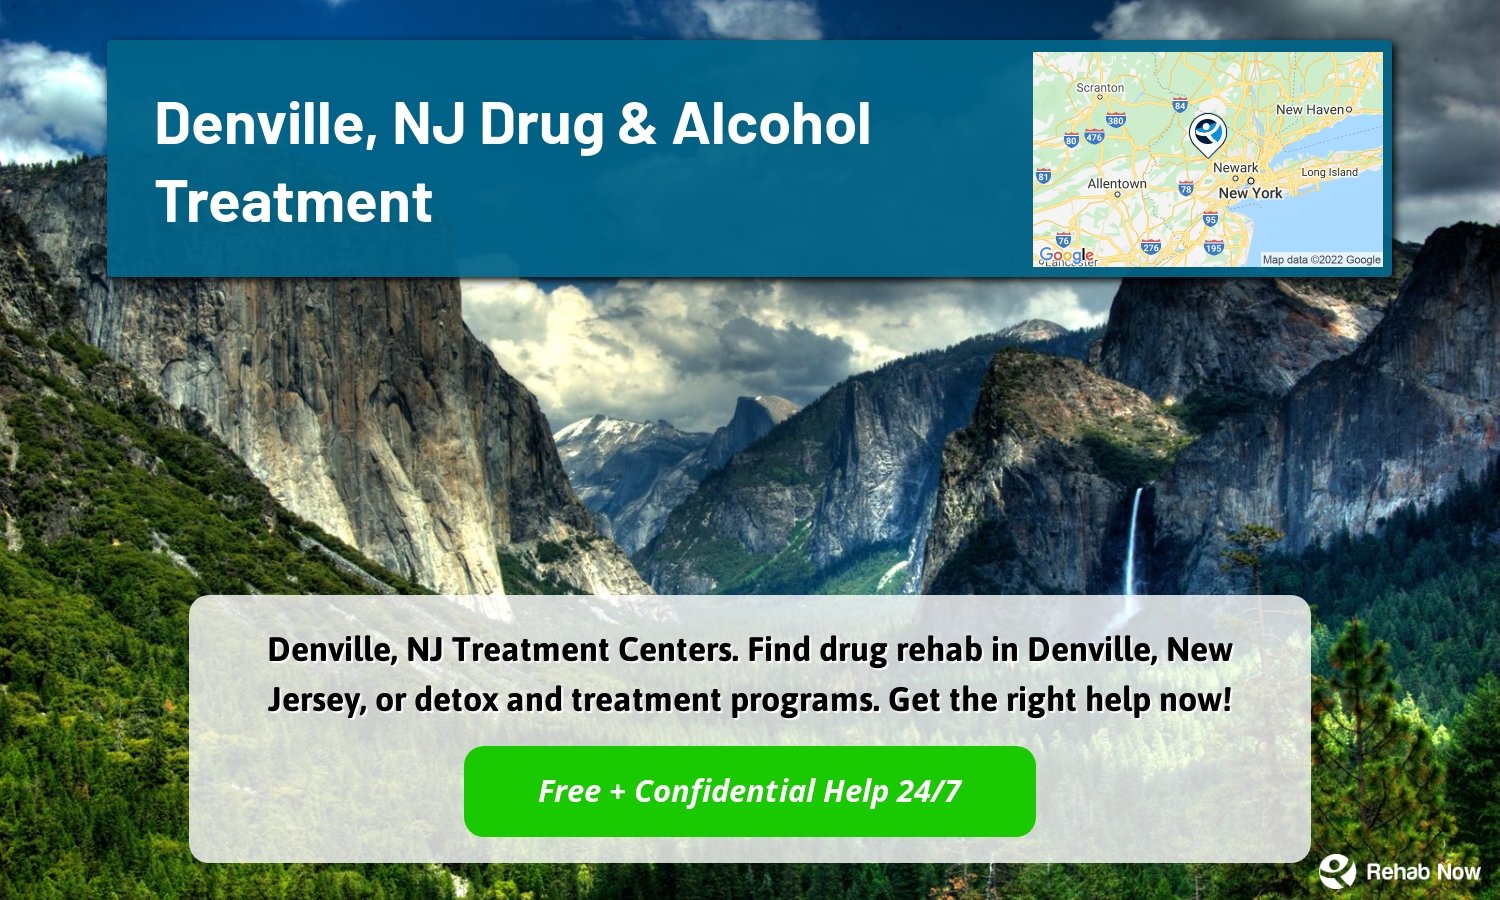 Denville, NJ Treatment Centers. Find drug rehab in Denville, New Jersey, or detox and treatment programs. Get the right help now!